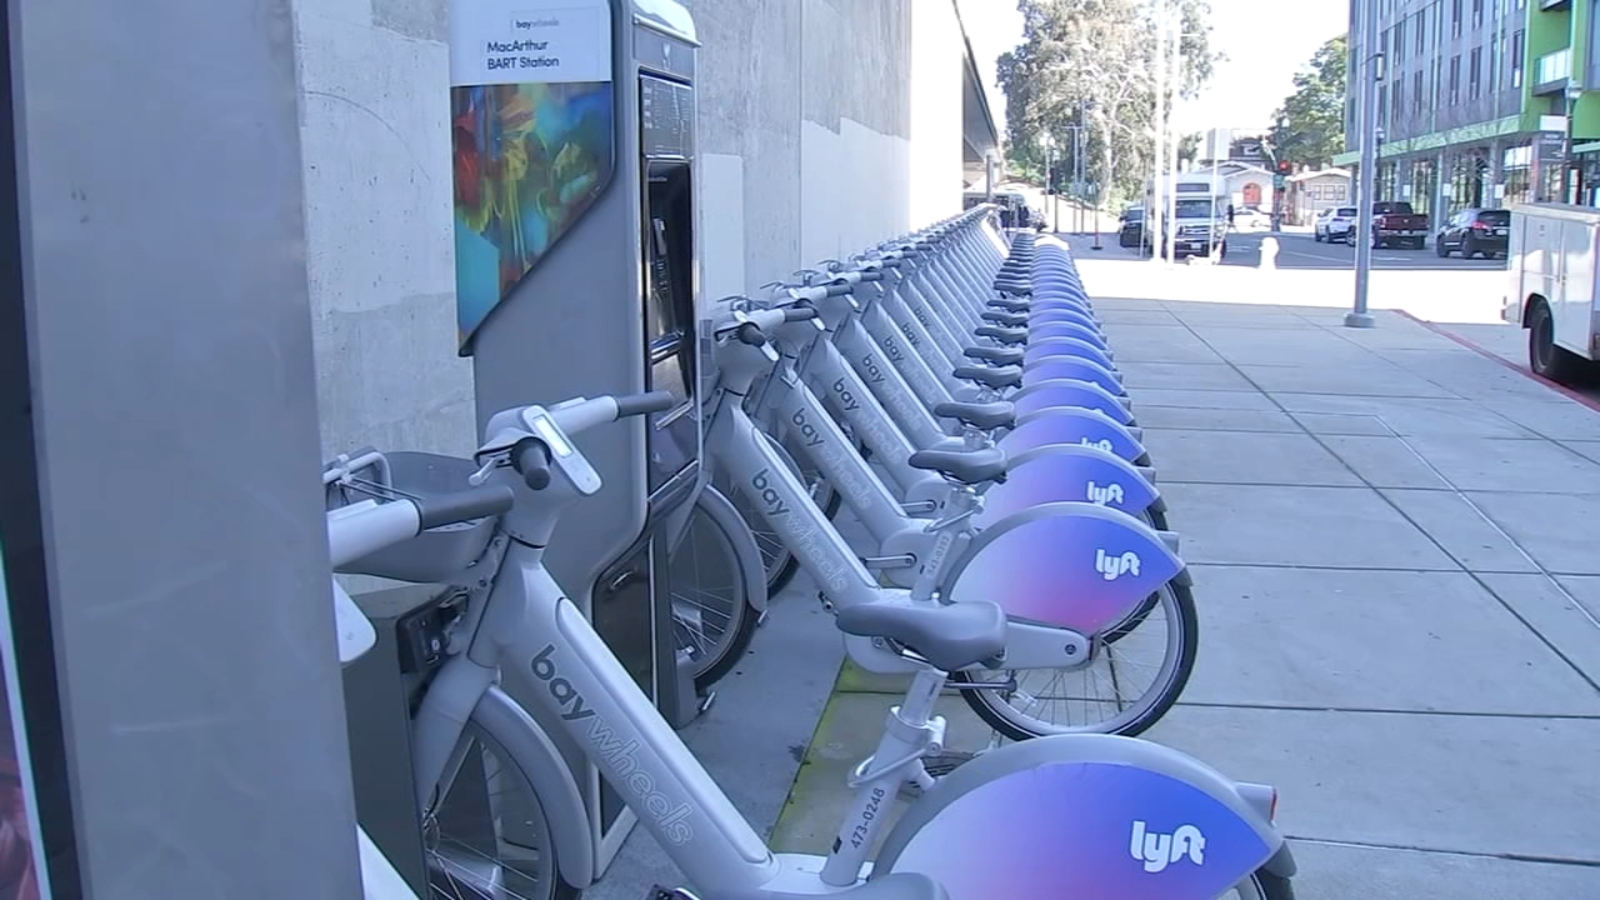 More electric bikes, docking stations coming to East Bay cities: Oakland, Berkeley and Emeryville [Video]